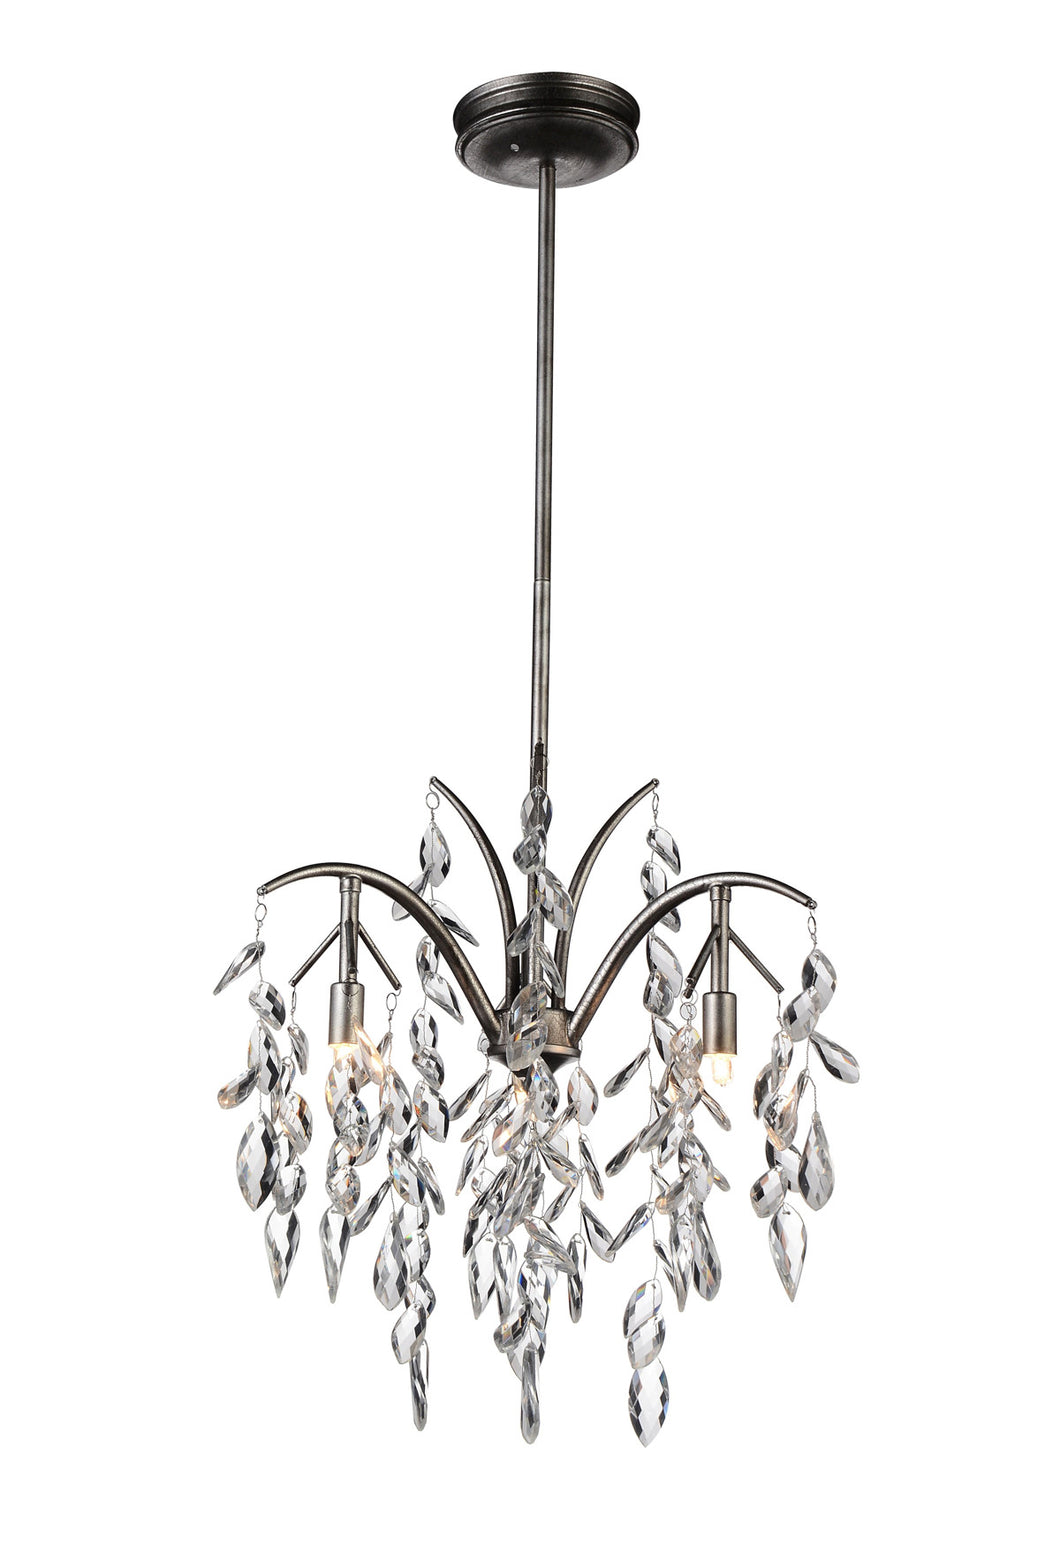 3 Light Down Chandelier with Silver Mist finish